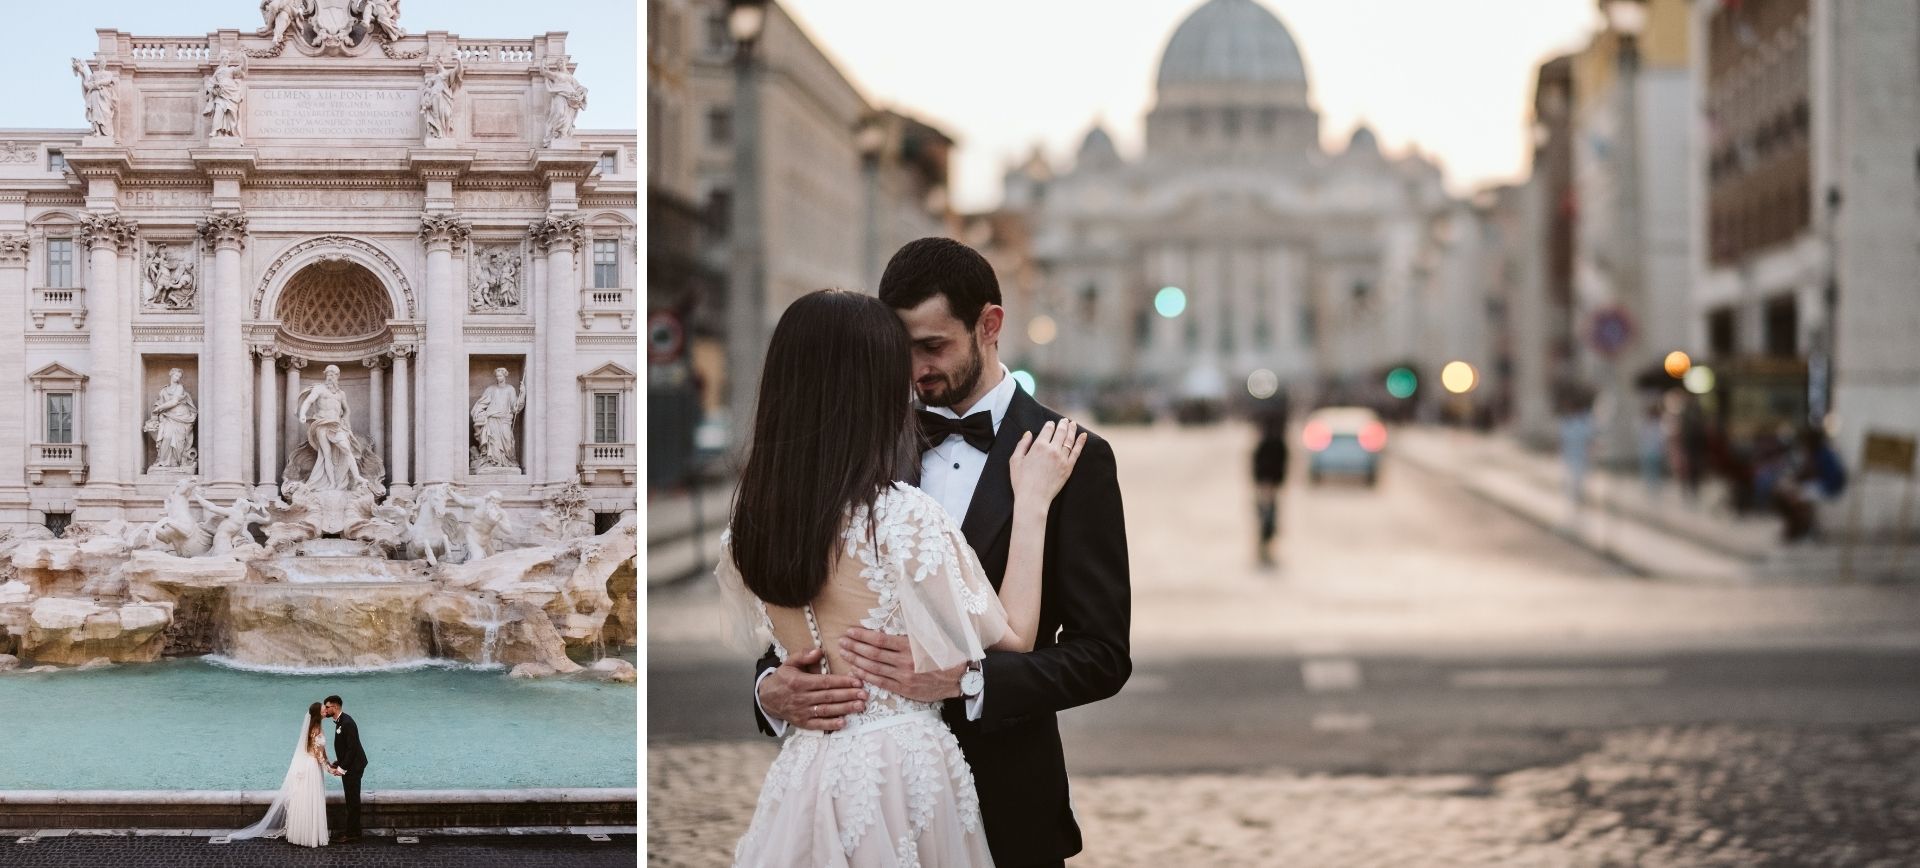 rome elopement package - bride and groom at their wedding in italy